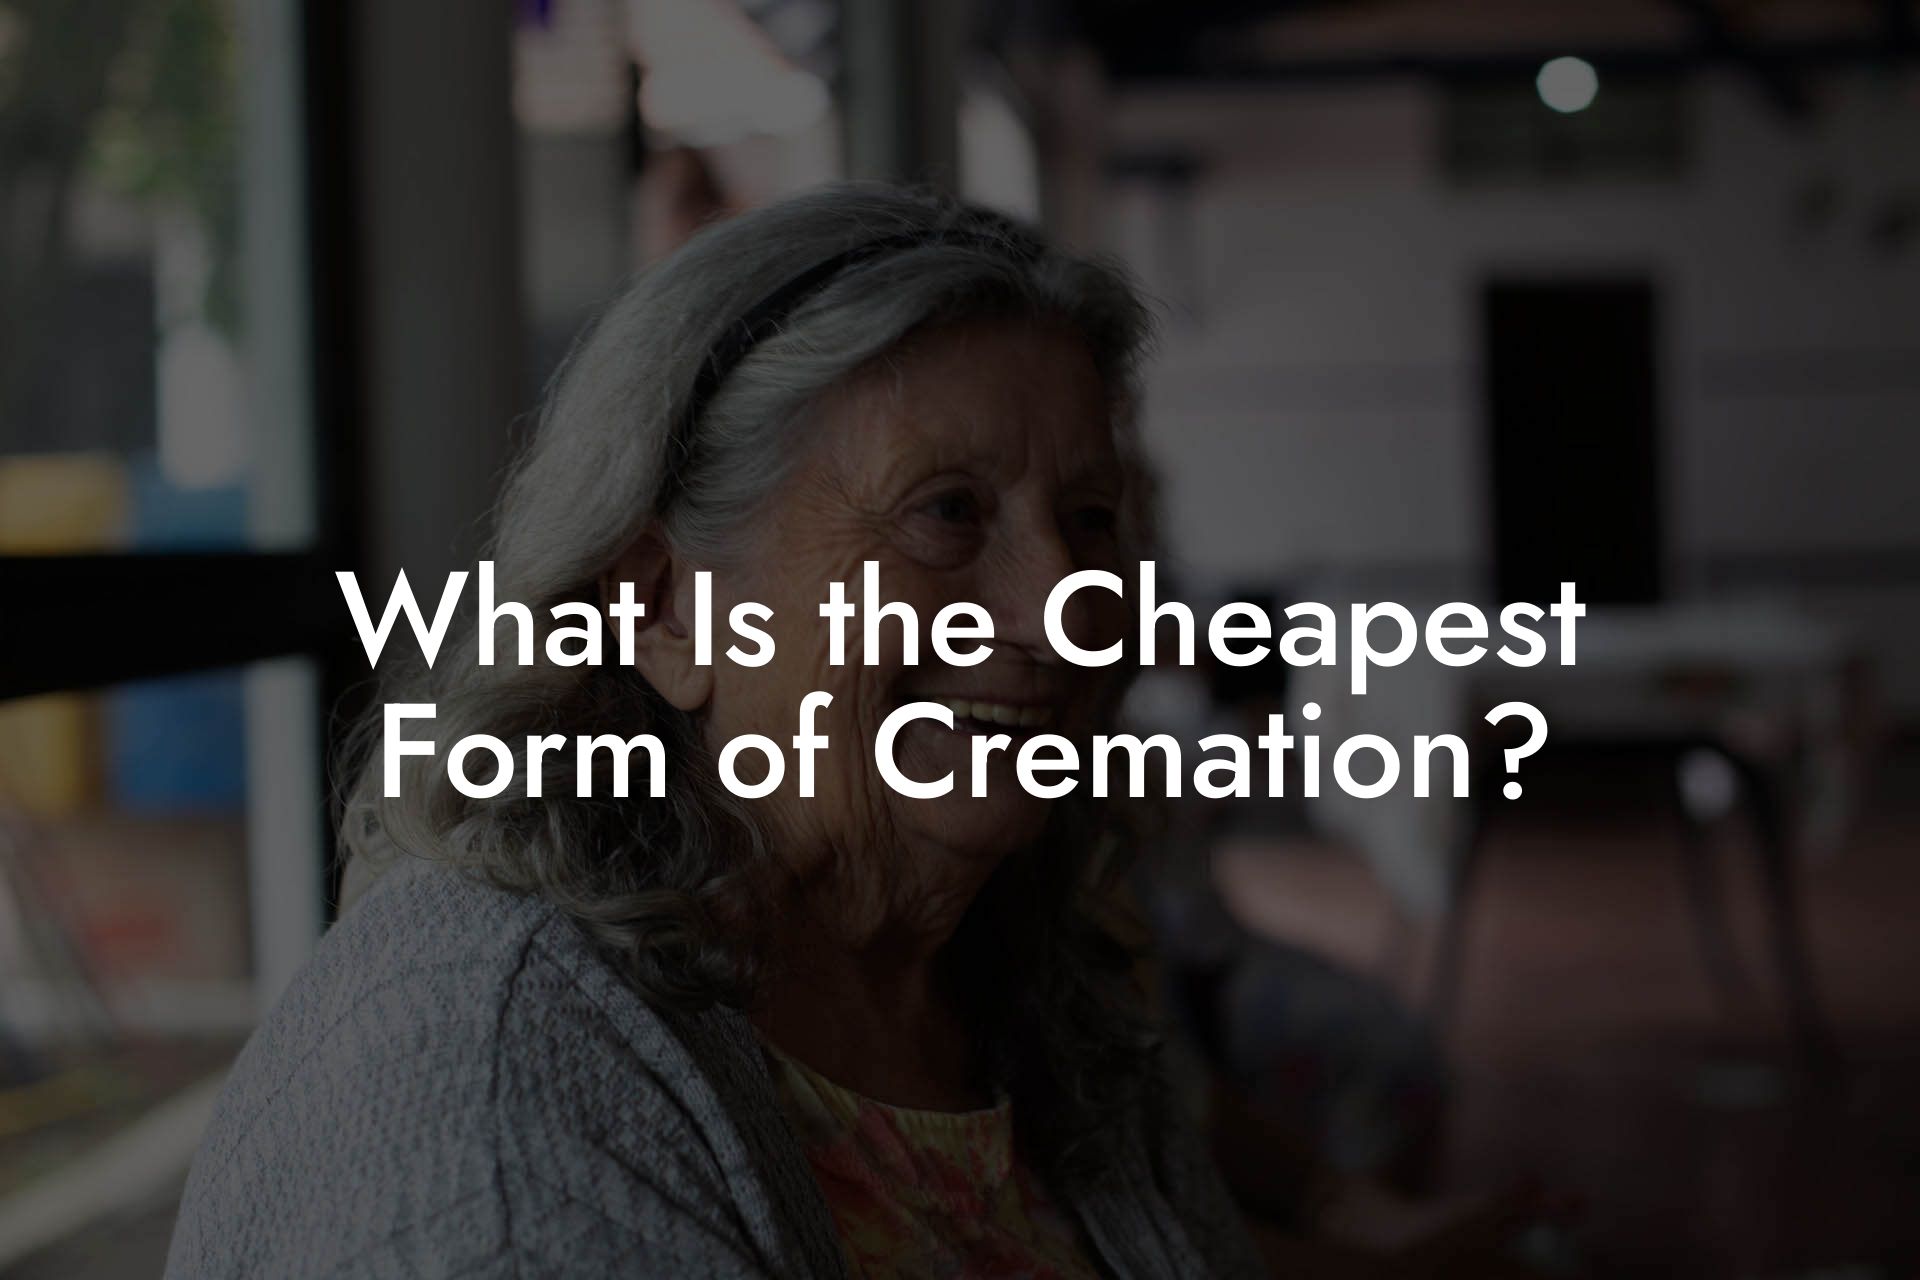 What Is the Cheapest Form of Cremation?